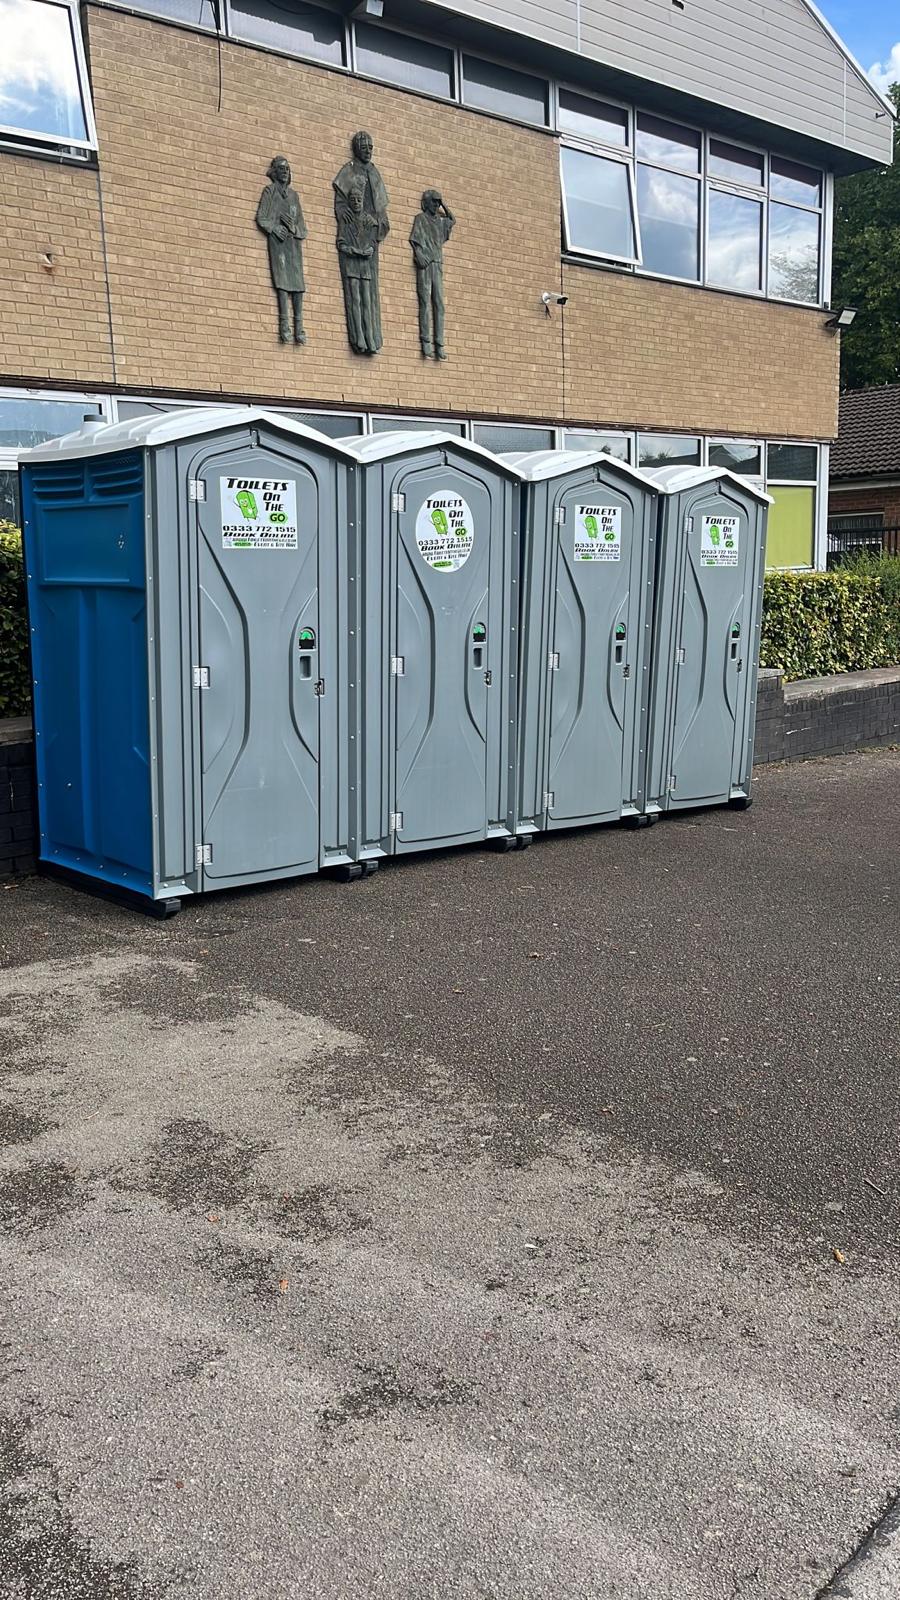 Gallery | Portable Toilet Loo Hire Rental Company in North West uk and Manchester gallery image 62